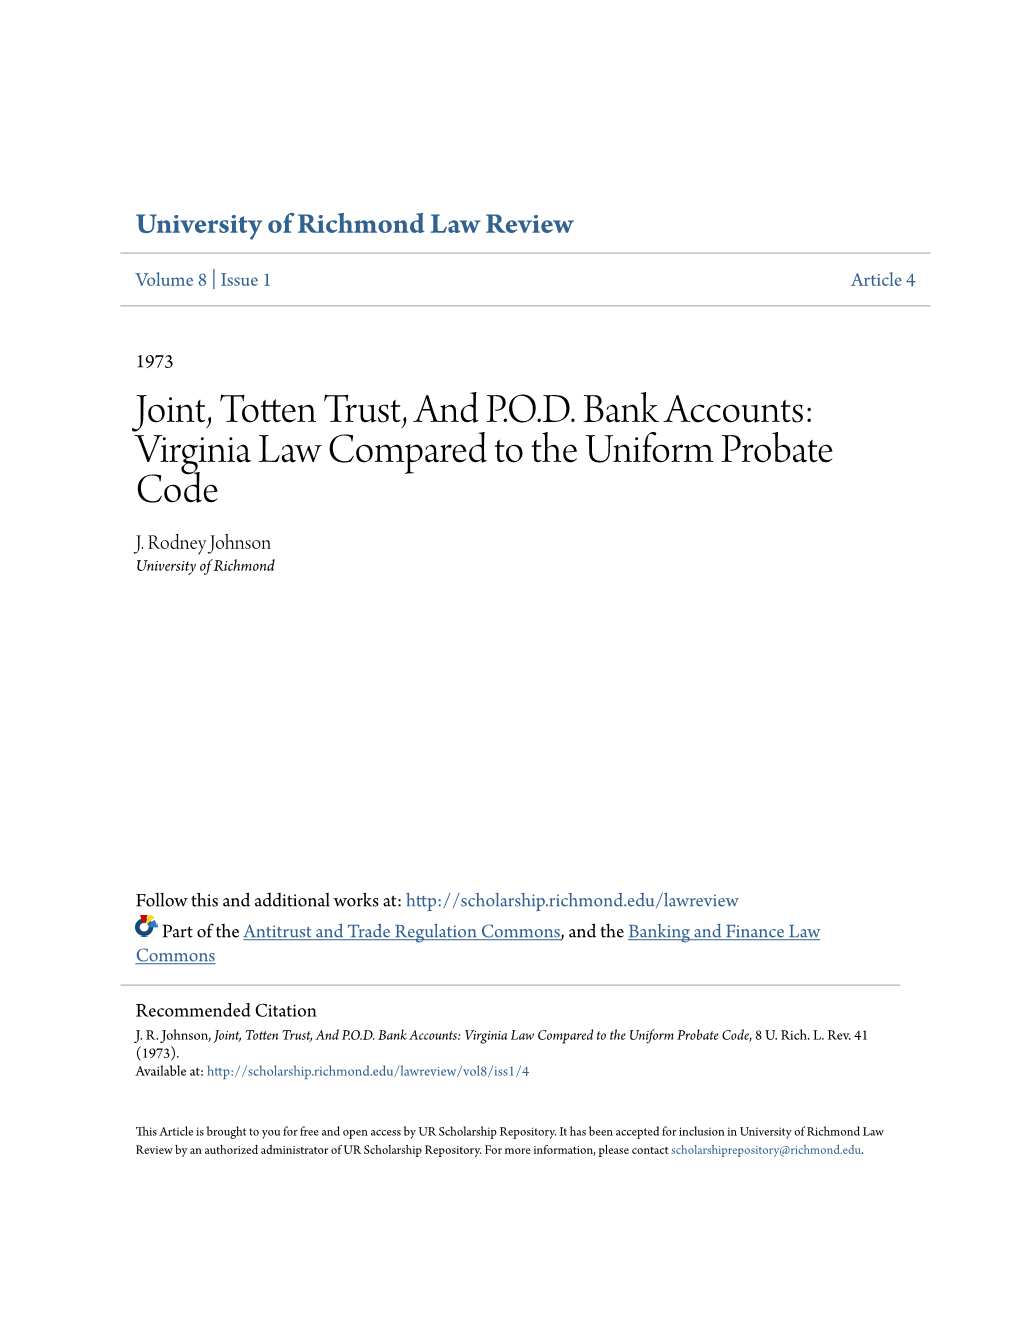 Joint, Totten Trust, and P.O.D. Bank Accounts: Virginia Law Compared to the Uniform Probate Code J